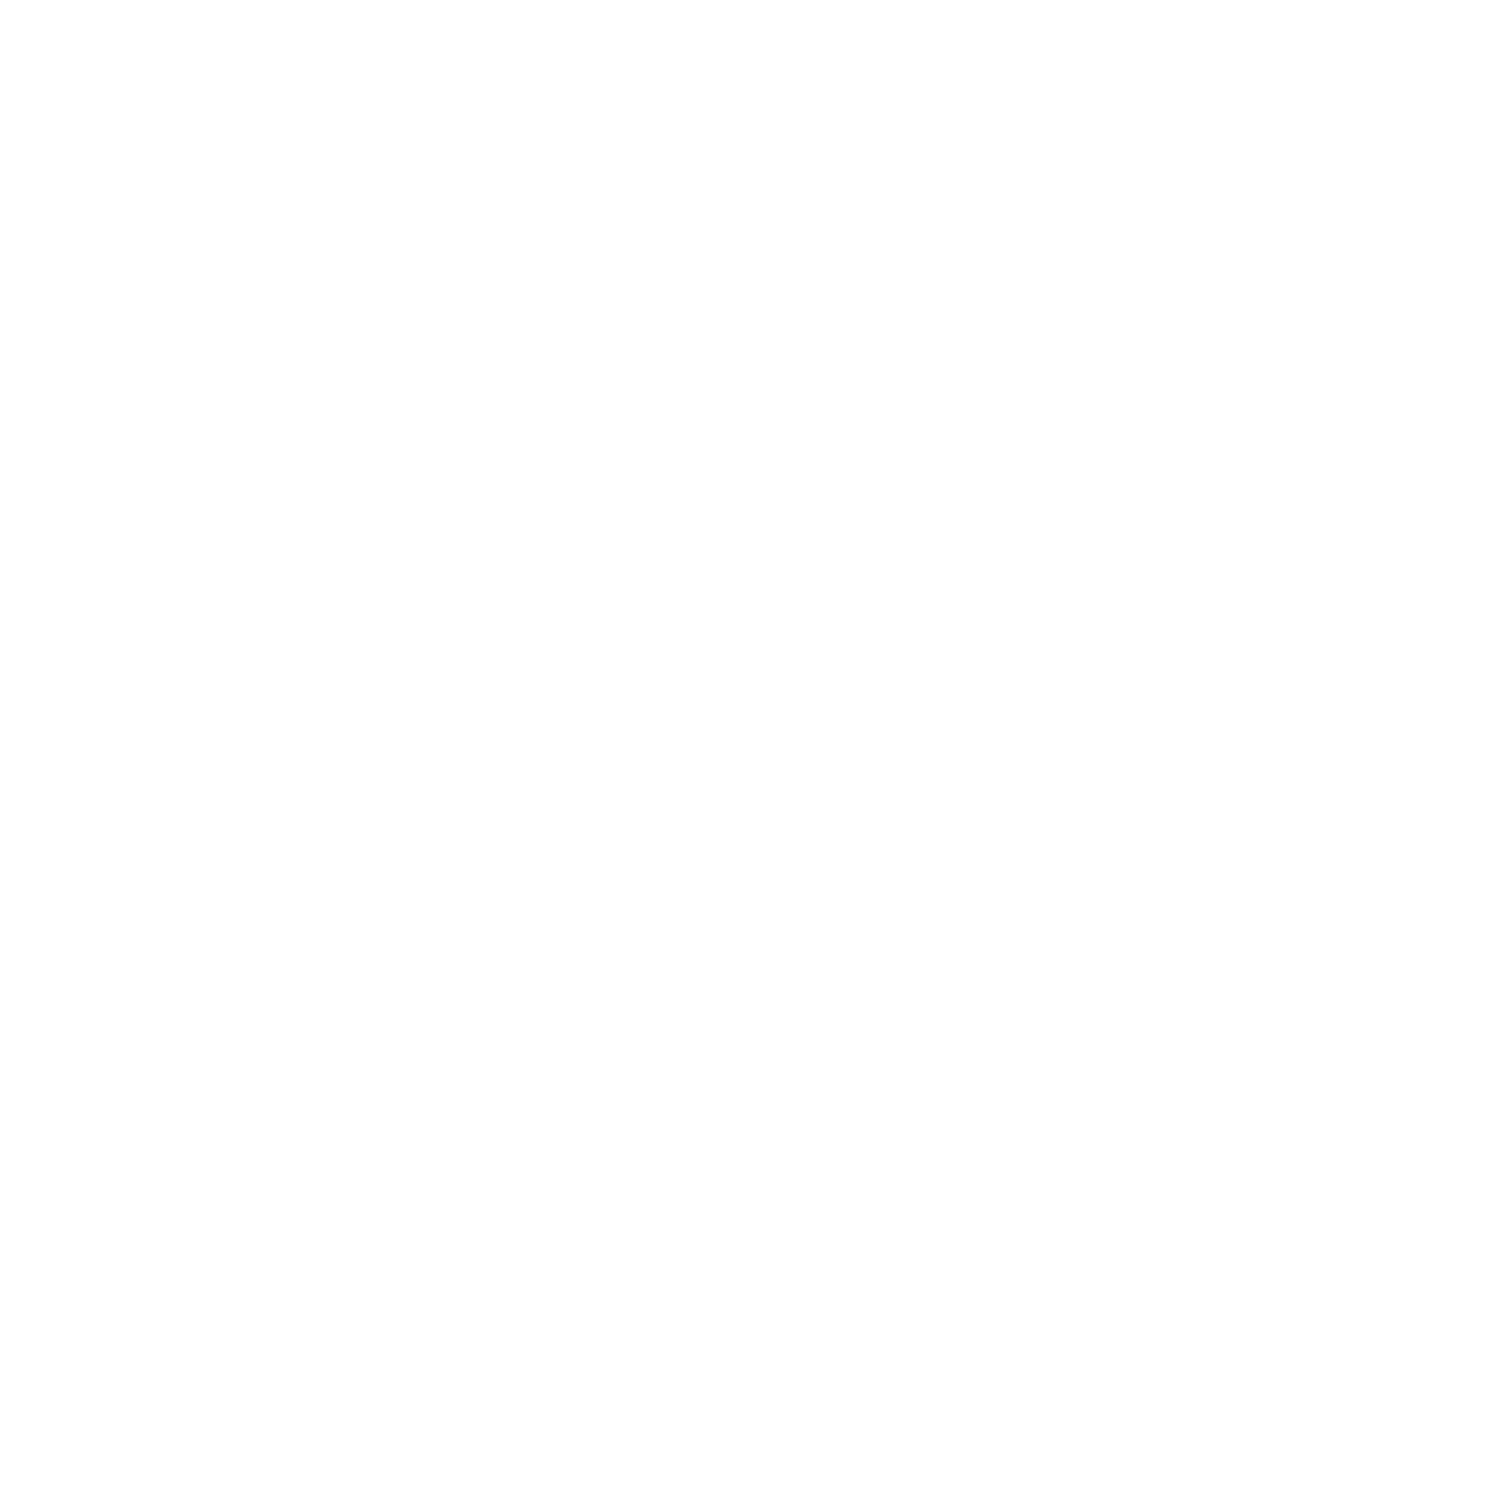 Caan Rose Estates Ltd - Slough : Letting agents in Yiewsley Greater London Hillingdon